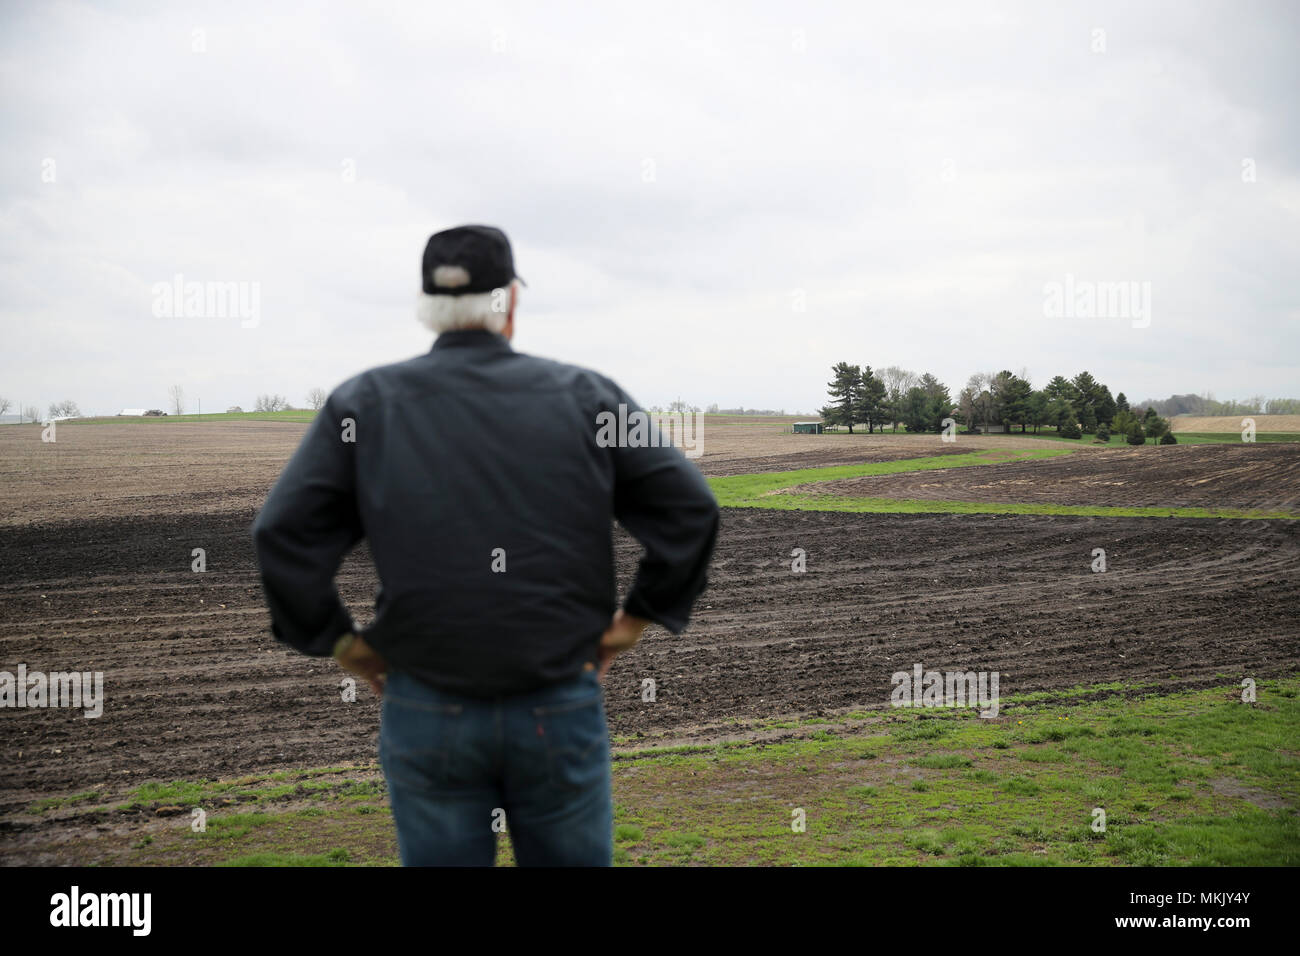 (180509) -- IOWA, May 9, 2018 (Xinhua) -- Rick Kimberley looks at the field at his farm near Des Moines, capital of Iowa State, May 3, 2018. Rick and his son, Grant, grow more than 4,000 acres of corn and soybeans with a couple of hired hands and massive combines whose computers precisely track yield, moisture and other key statistics for each row and acre. He has been to China 15 times in recent years to talk about precision farming and other tricks of his trade, becoming an ambassador for modern farming methods in China. As for the current trade tensions between the United States and China, Stock Photo